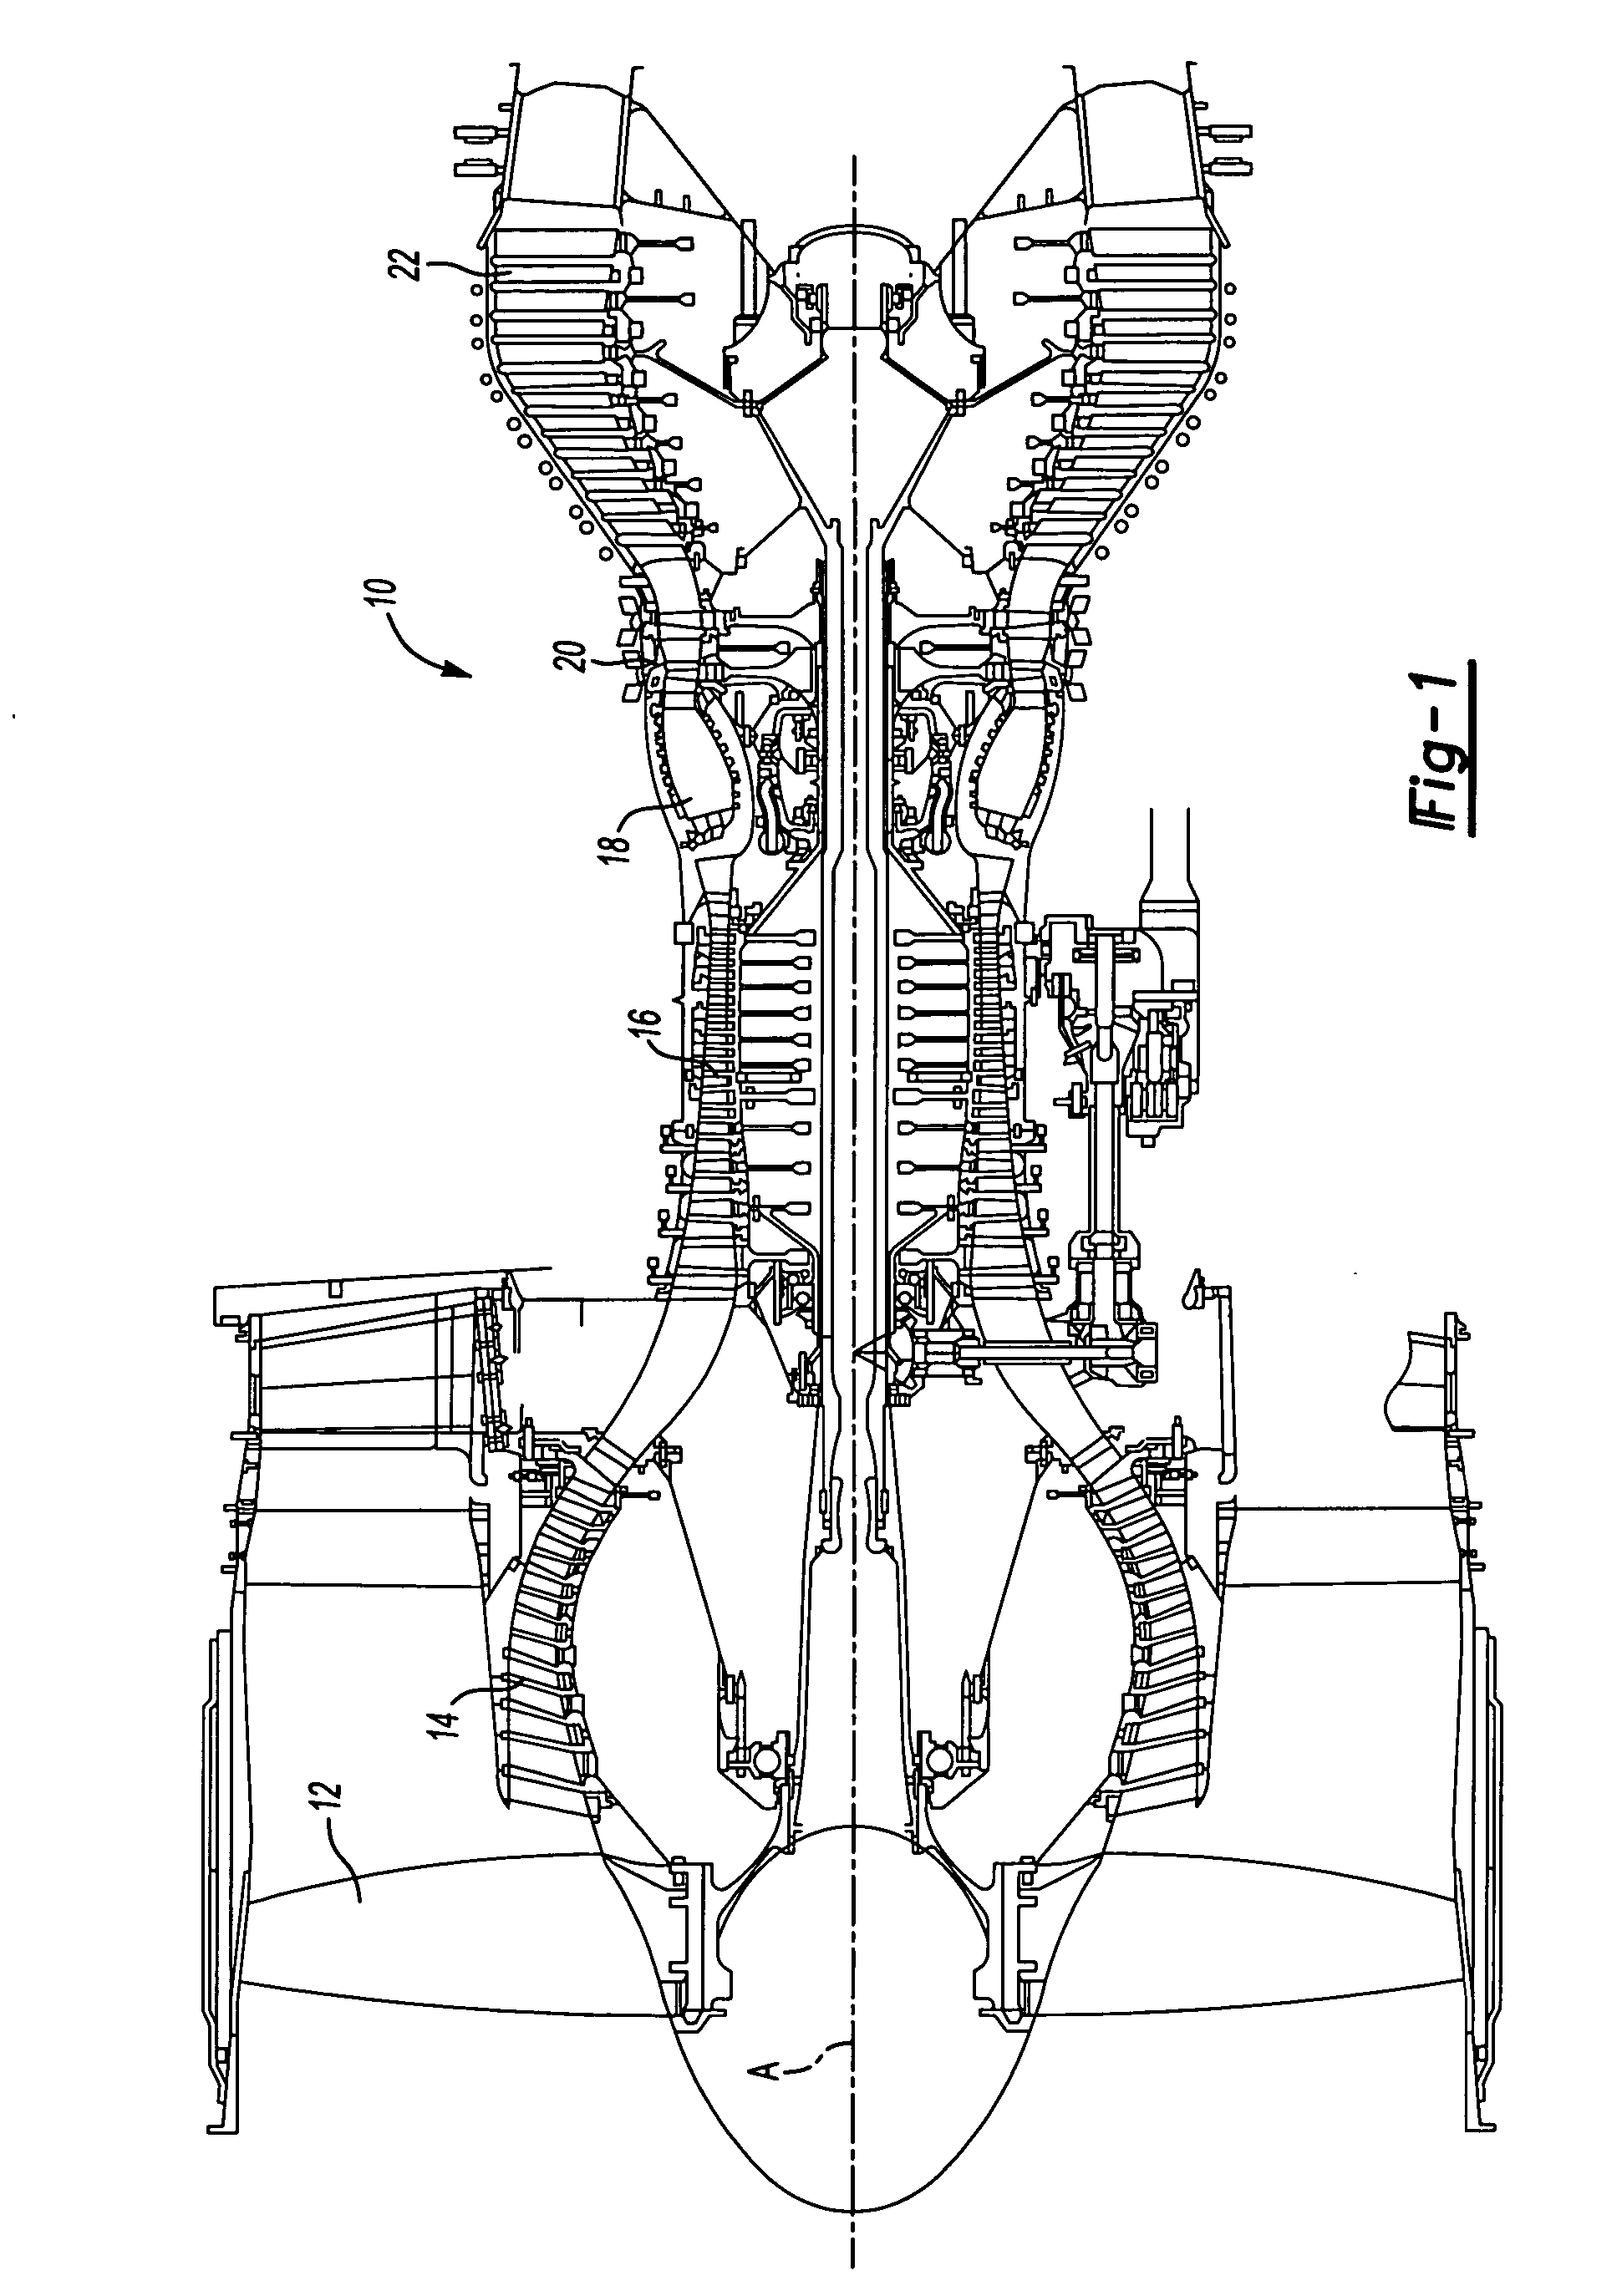 Stator vane assembly for a gas turbine engine